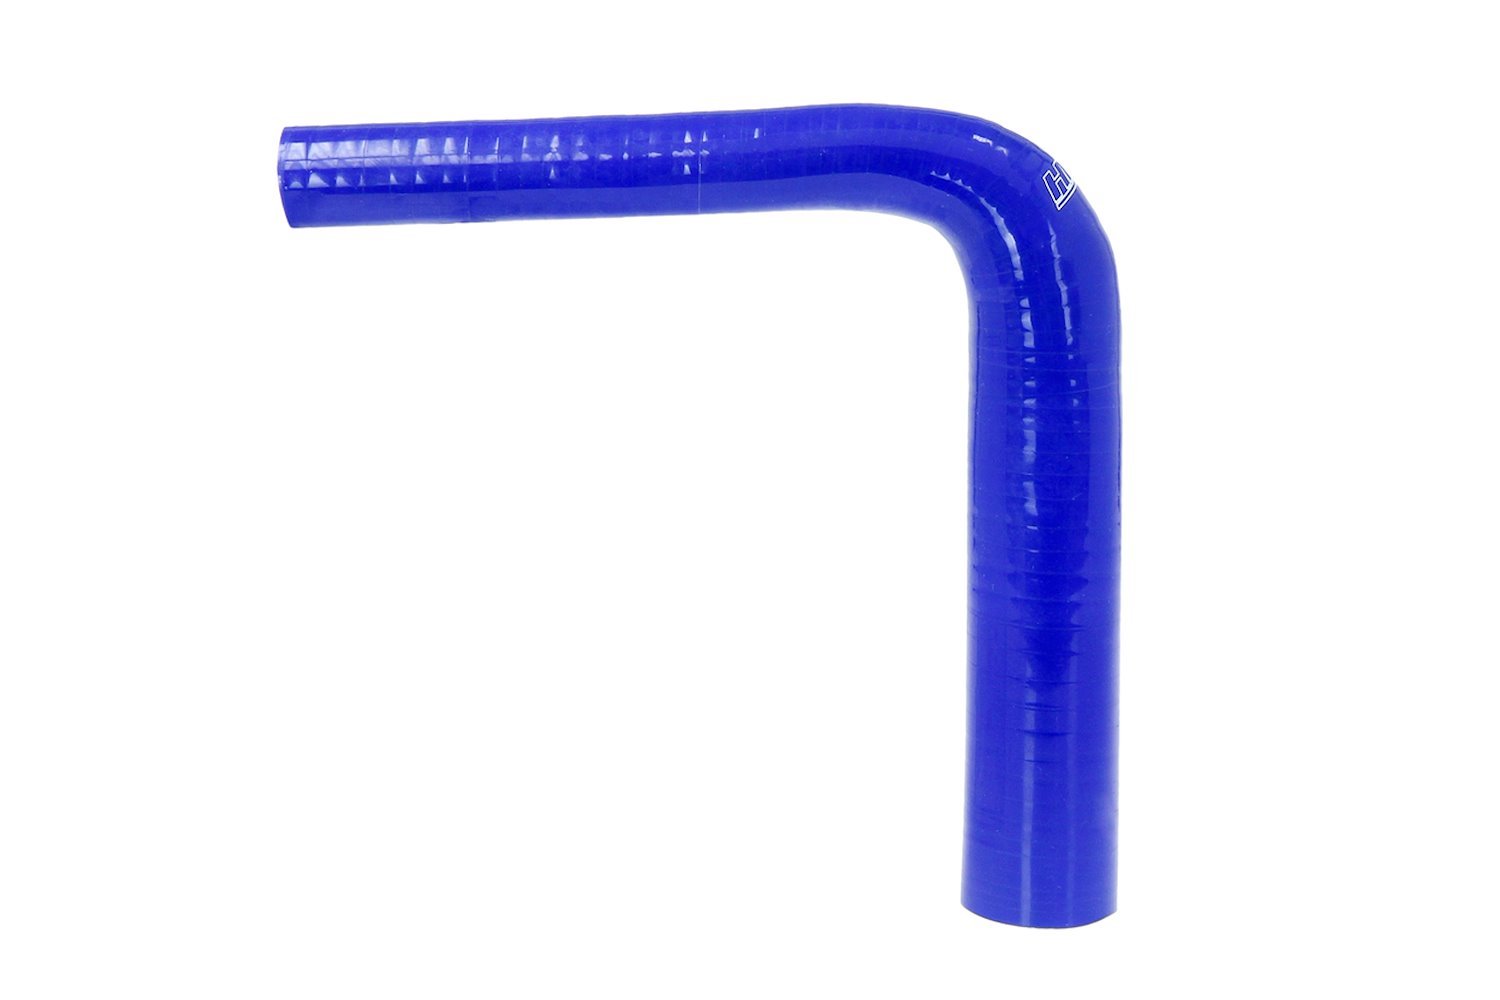 HTSER90-138-200-BLUE Silicone 90-Degree Elbow Hose, High-Temp 4-Ply Reinforced, 1-3/8 in. - 2 in. ID, Blue